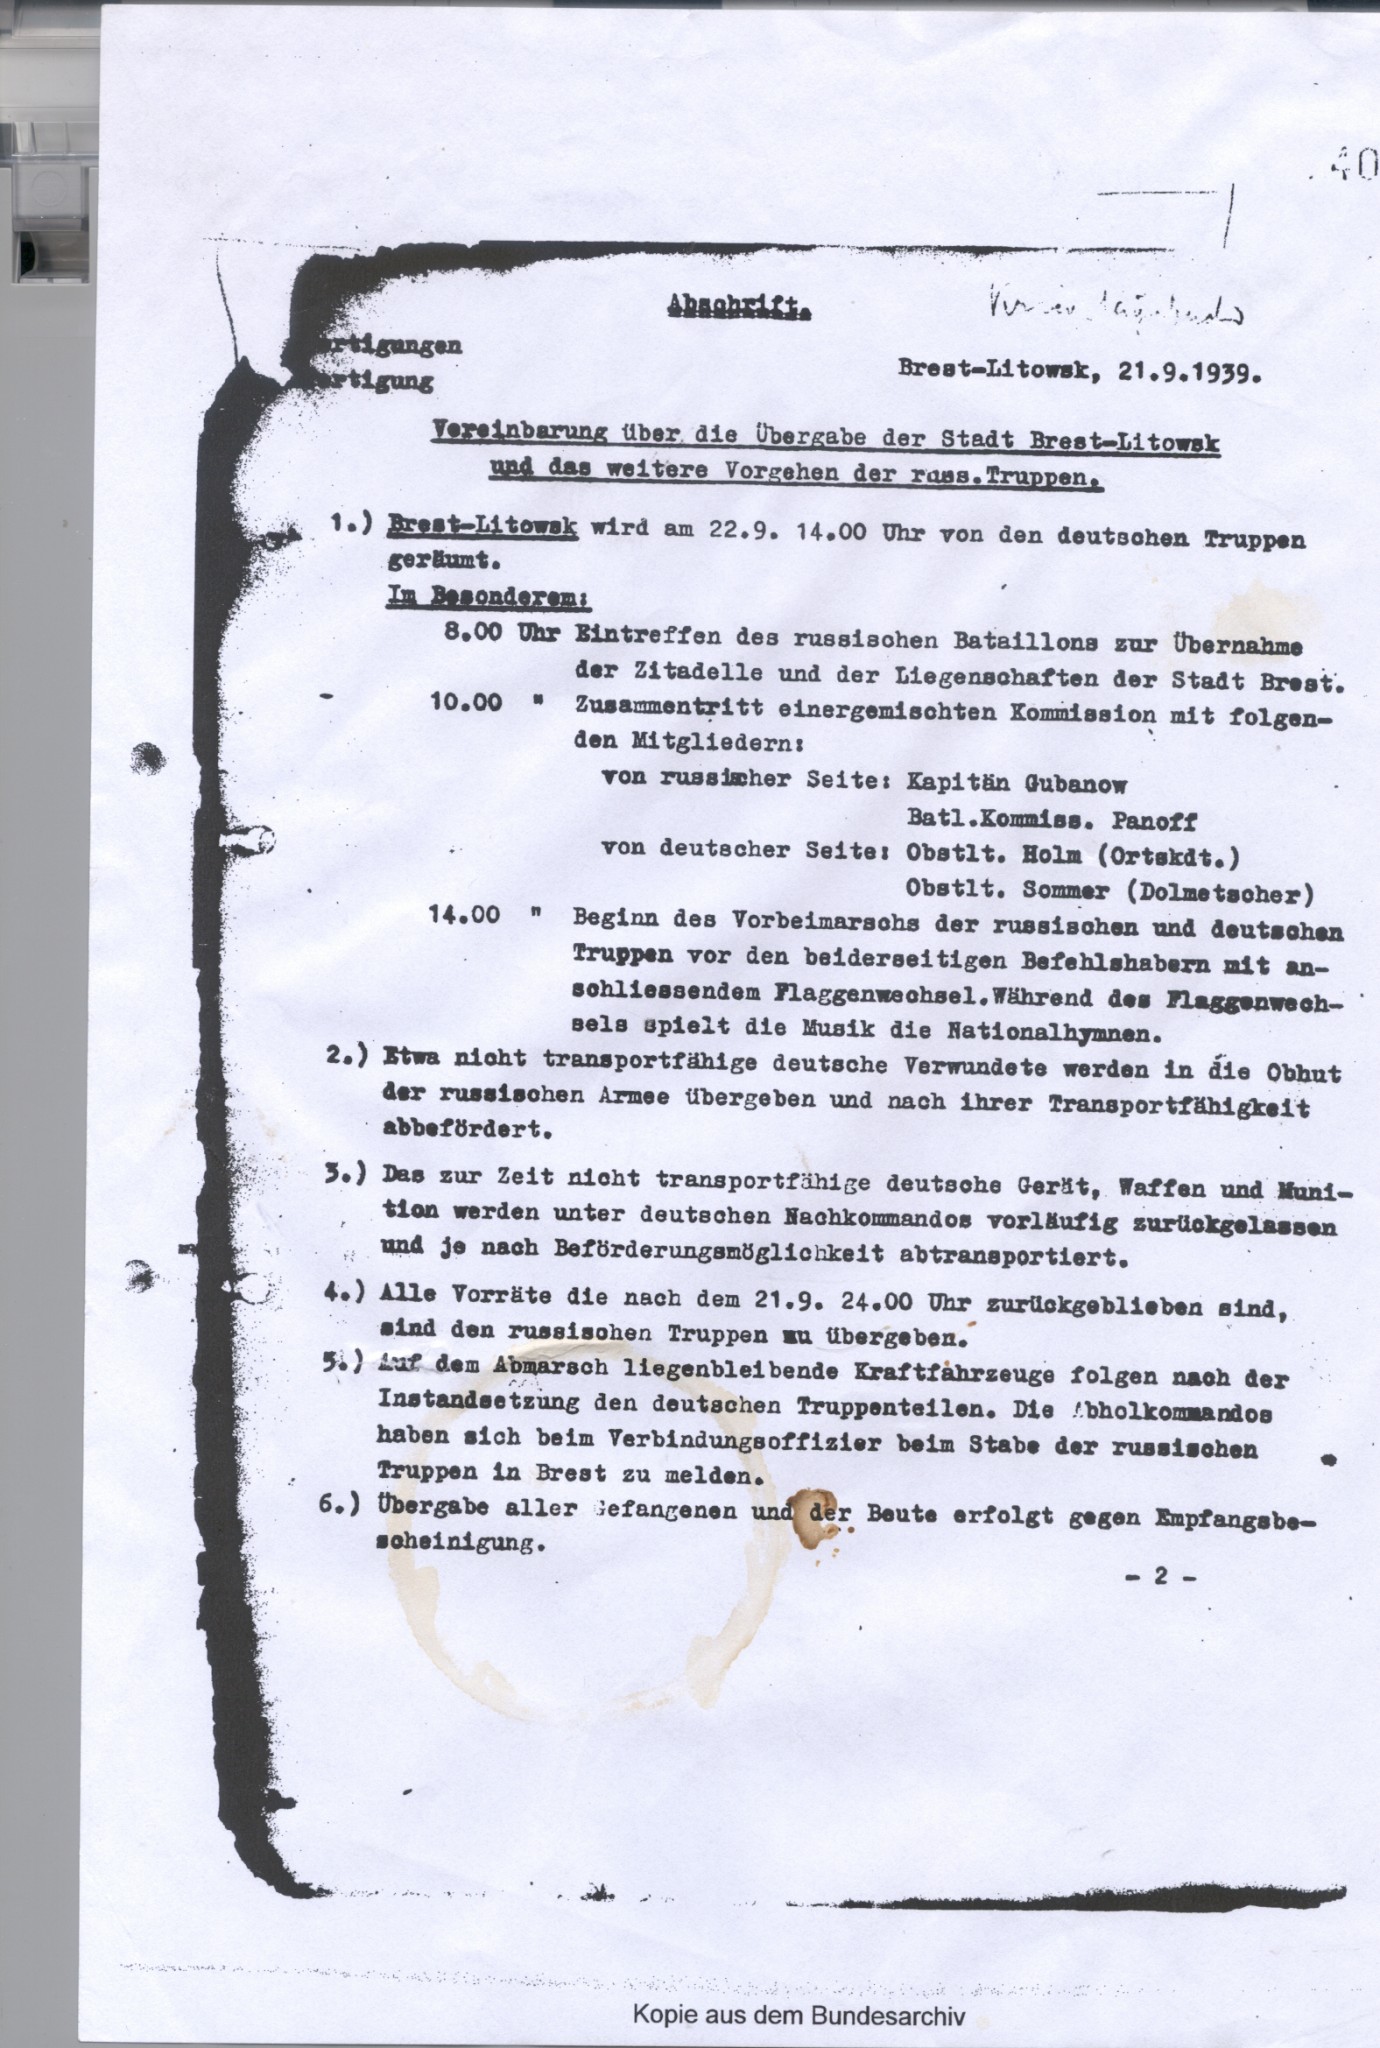 In Germany's Federal Military Archive, among documents of the top command of the 2nd Tank Group there's a document called "Vereinbarung mit sowjetischen Offizieren über die Überlassung von Brest-Litowsk" (translated as "Agreement with Soviet Officers about the Transfer of Brest-Litovsk") dated September 21, 1939. Here's an excerpt from it: "14:00 (2:00 PM) -- Start of the ceremonial march (Vorbeimarsch) by the Russian and German troops in front of the commanders of both sides with concluding with a change of flags. During the flag change ceremony, the orchestra plays the national anthems." (Image: bild.bundesarchiv.de)